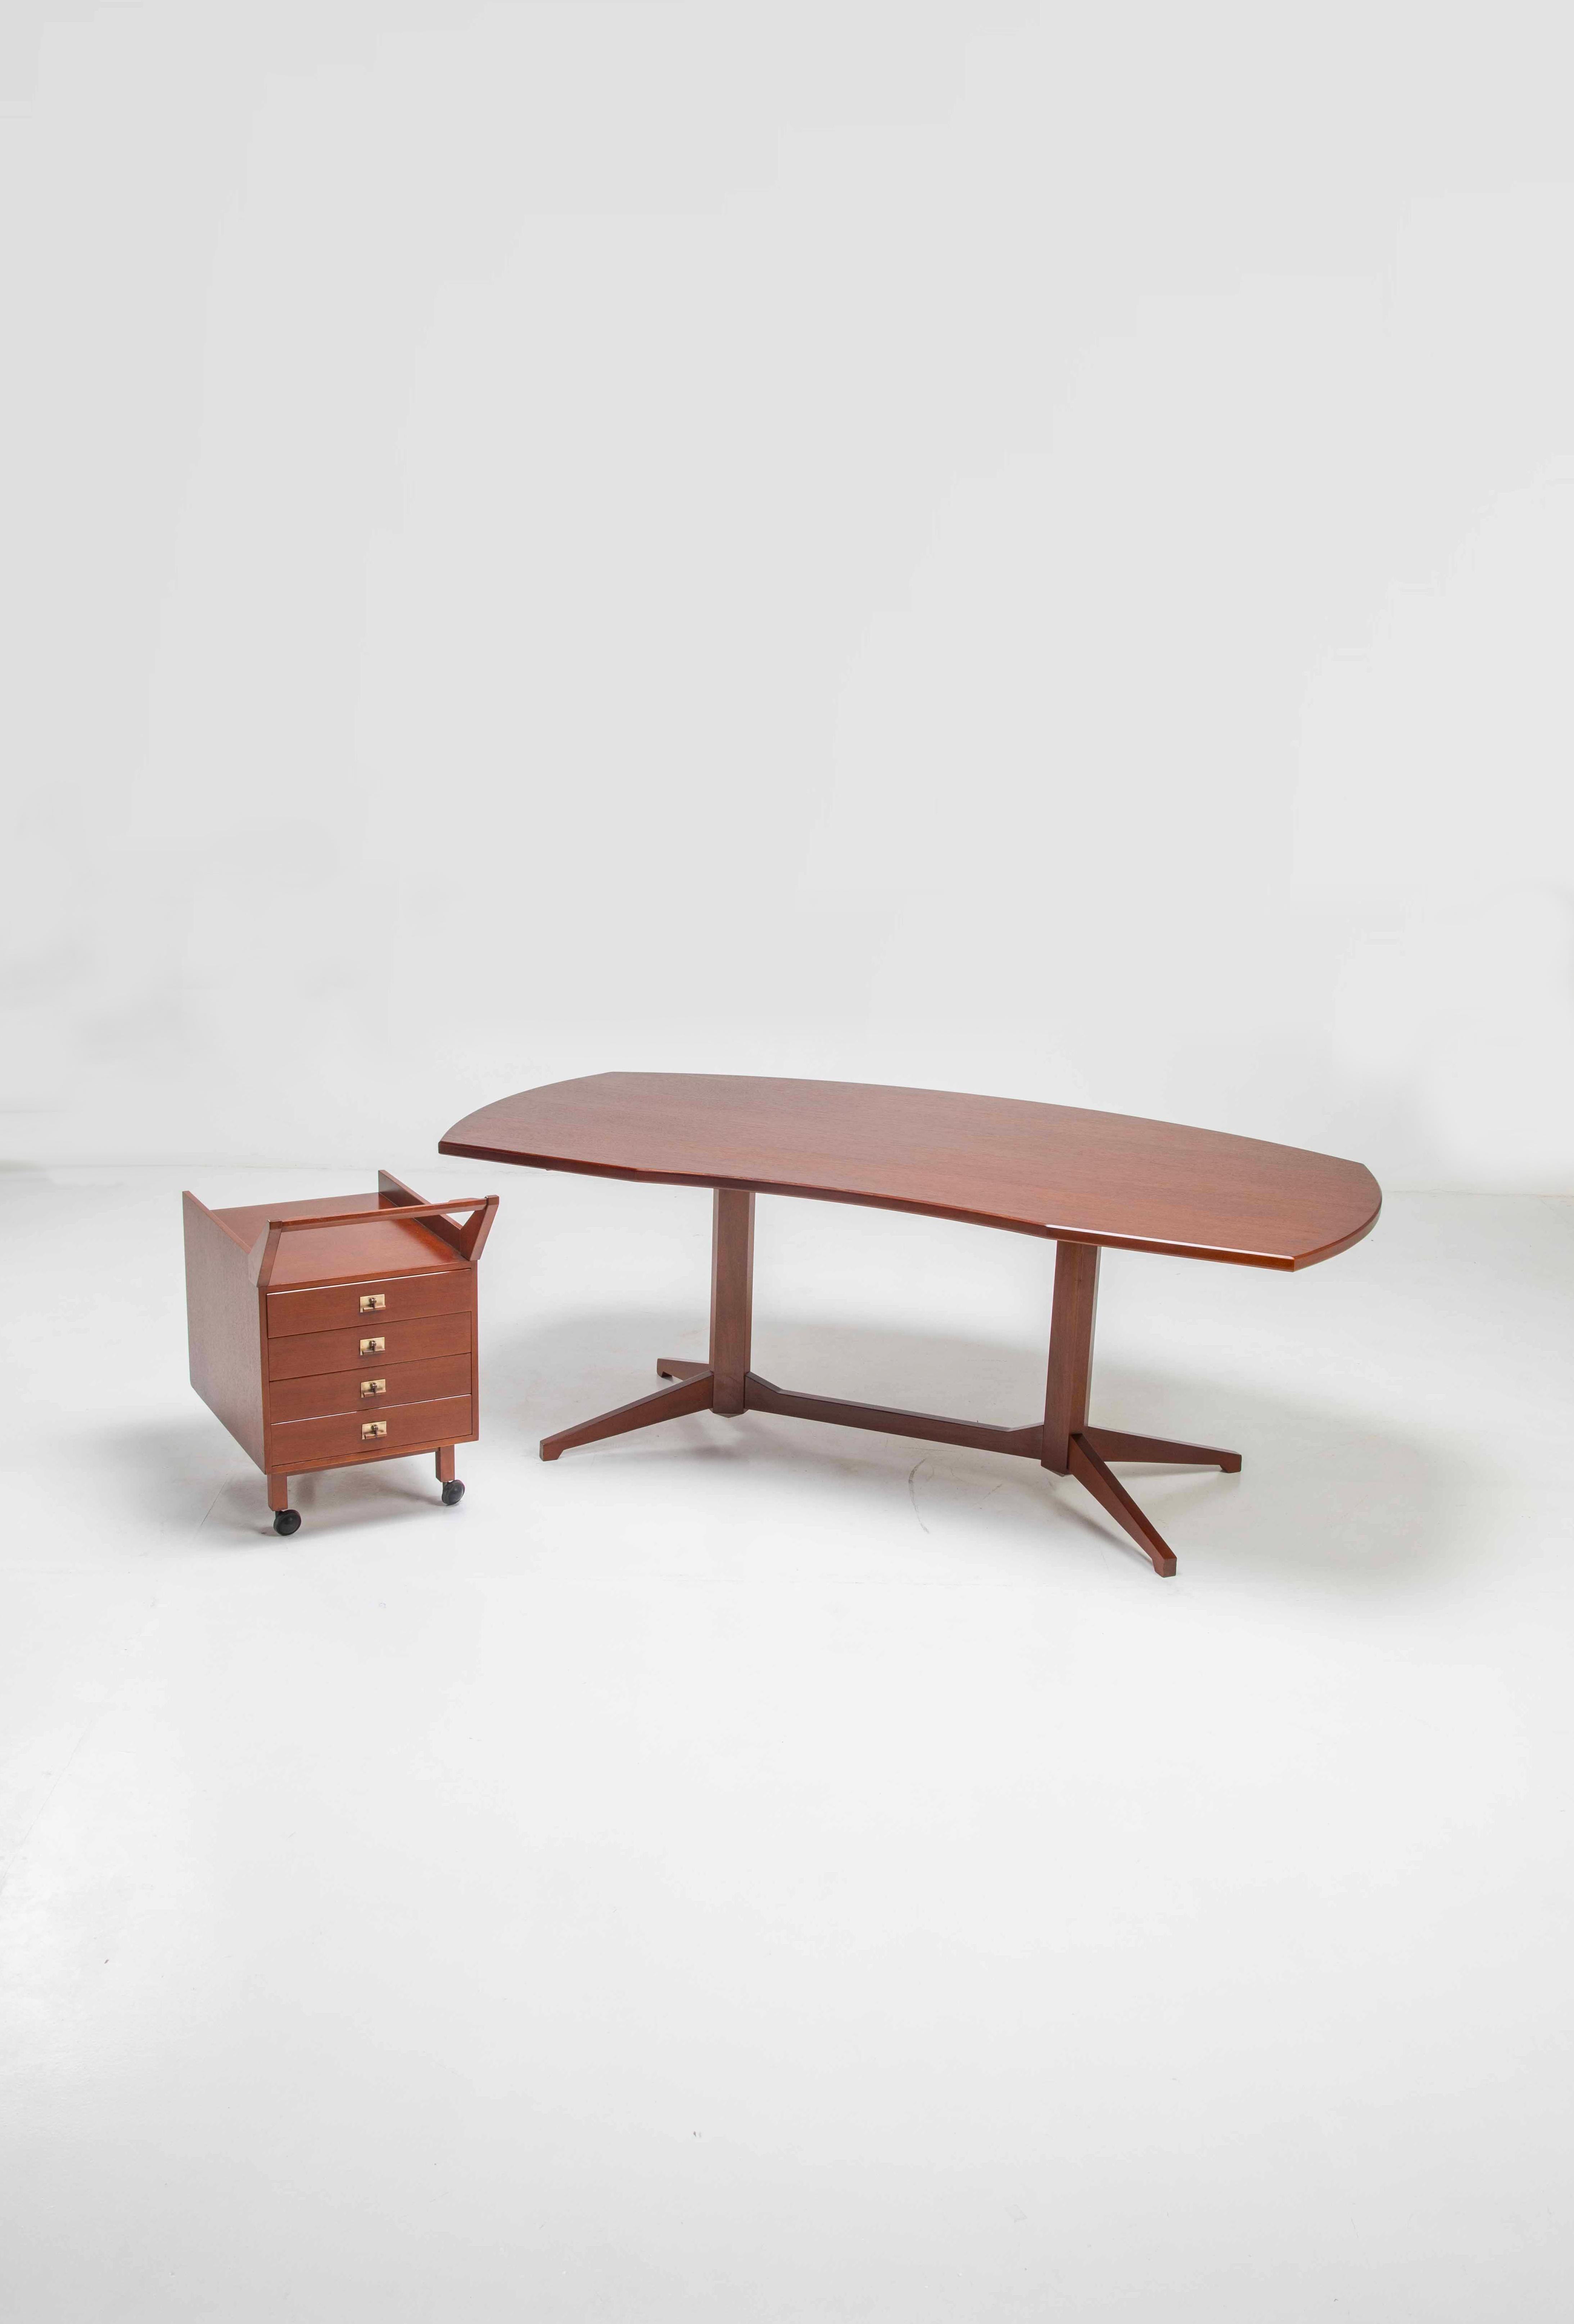 Franco Albini desk with mobile chest of drawers mod. T22, Italian Design  1950s In Good Condition For Sale In Milan, IT